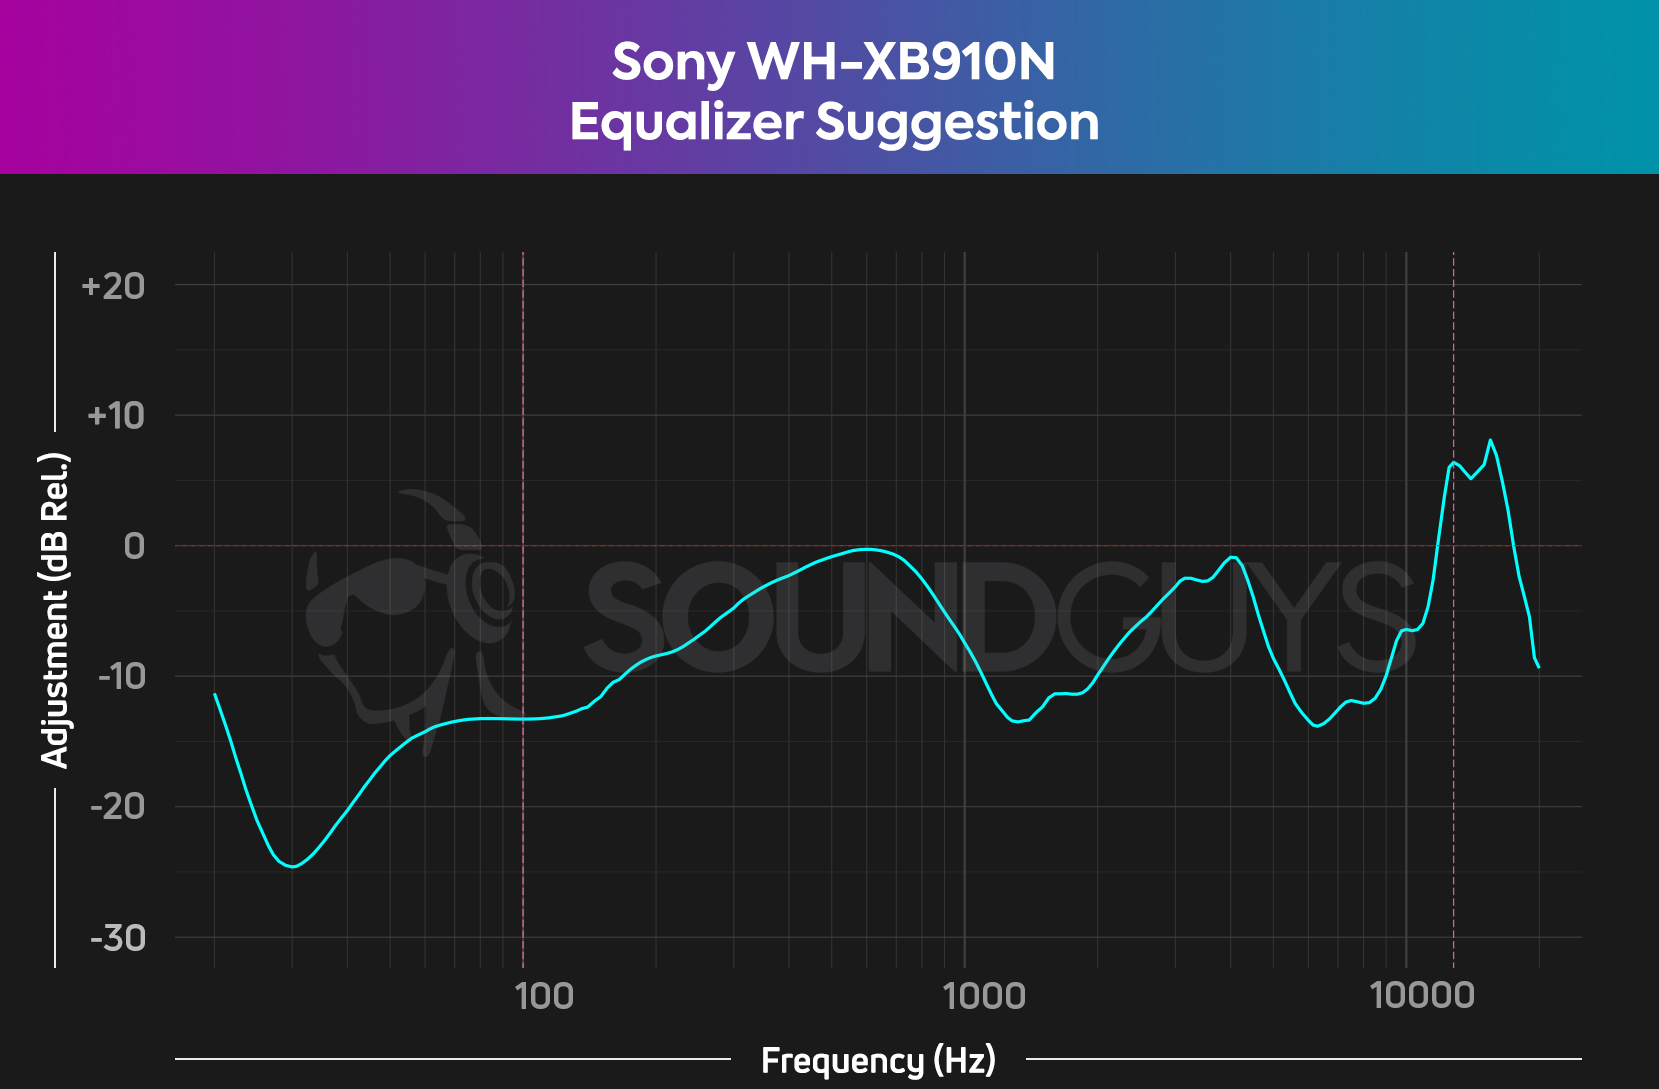 A chart showing how to EQ the Sony WH-XB910N to improve the sound.